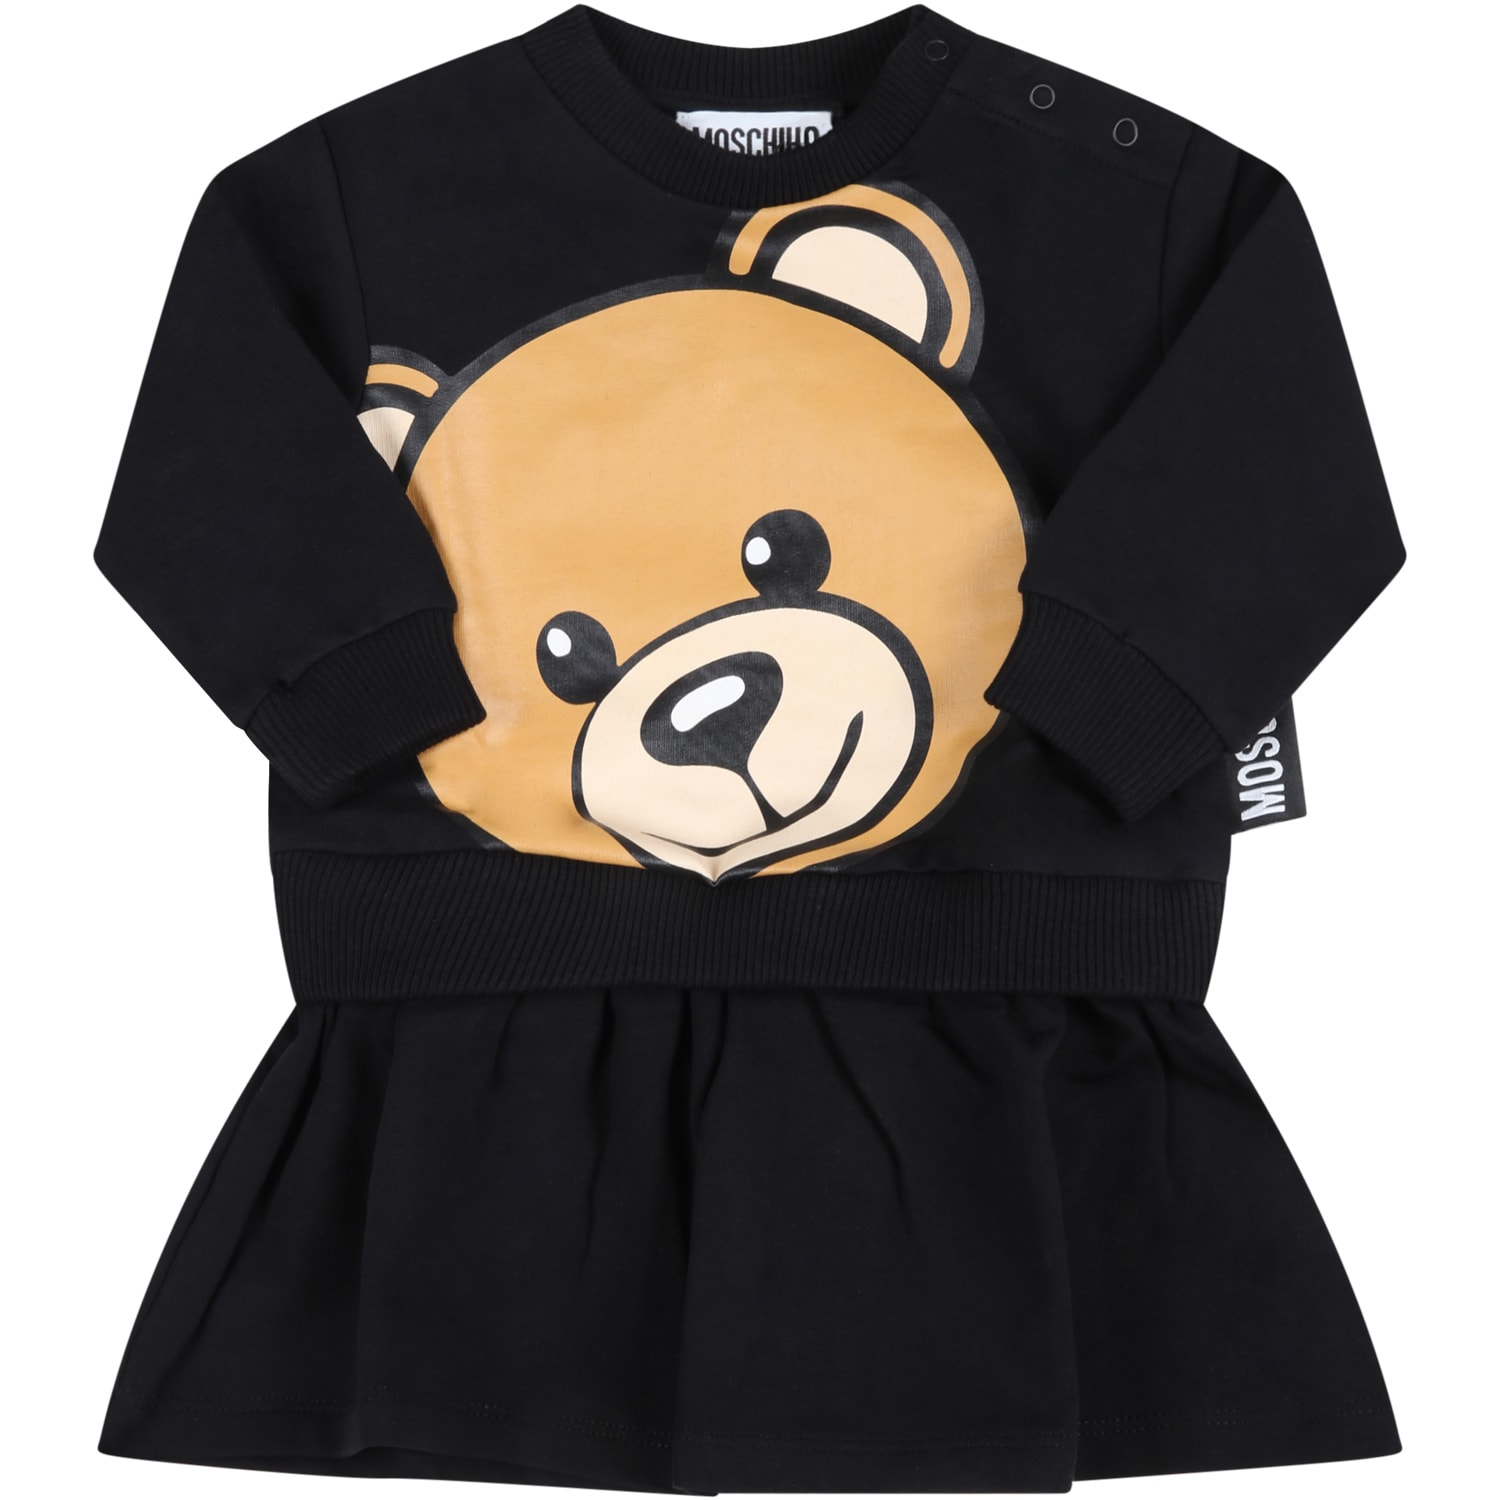 Moschino Black Dress For Baby Girl With Teddy Bear